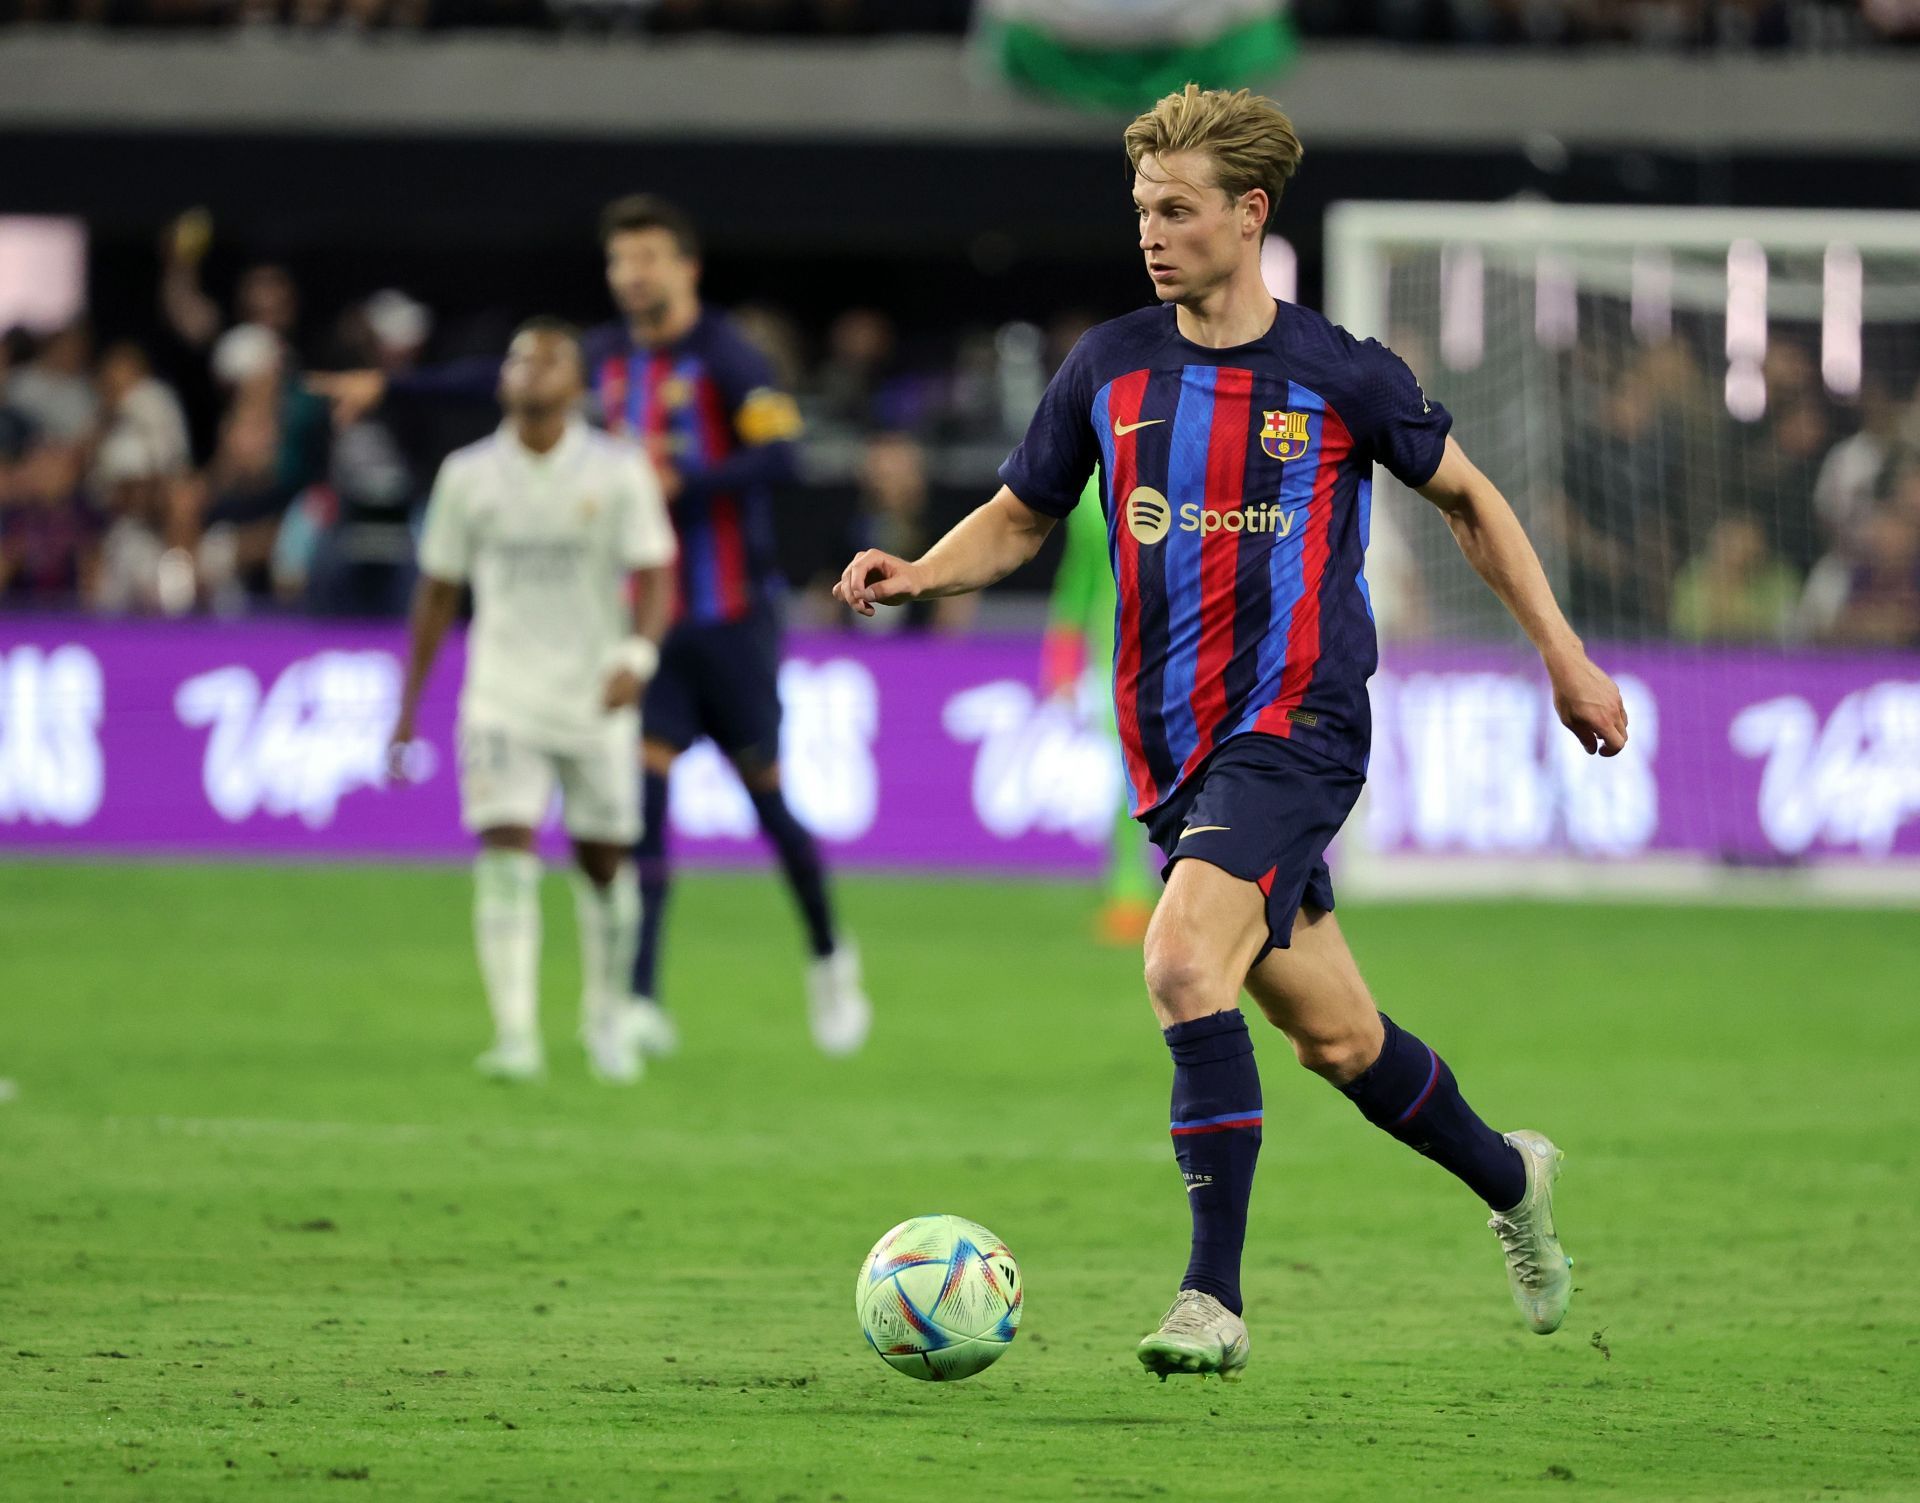 Manchester United are in hot pursuit of Frenkie de Jong